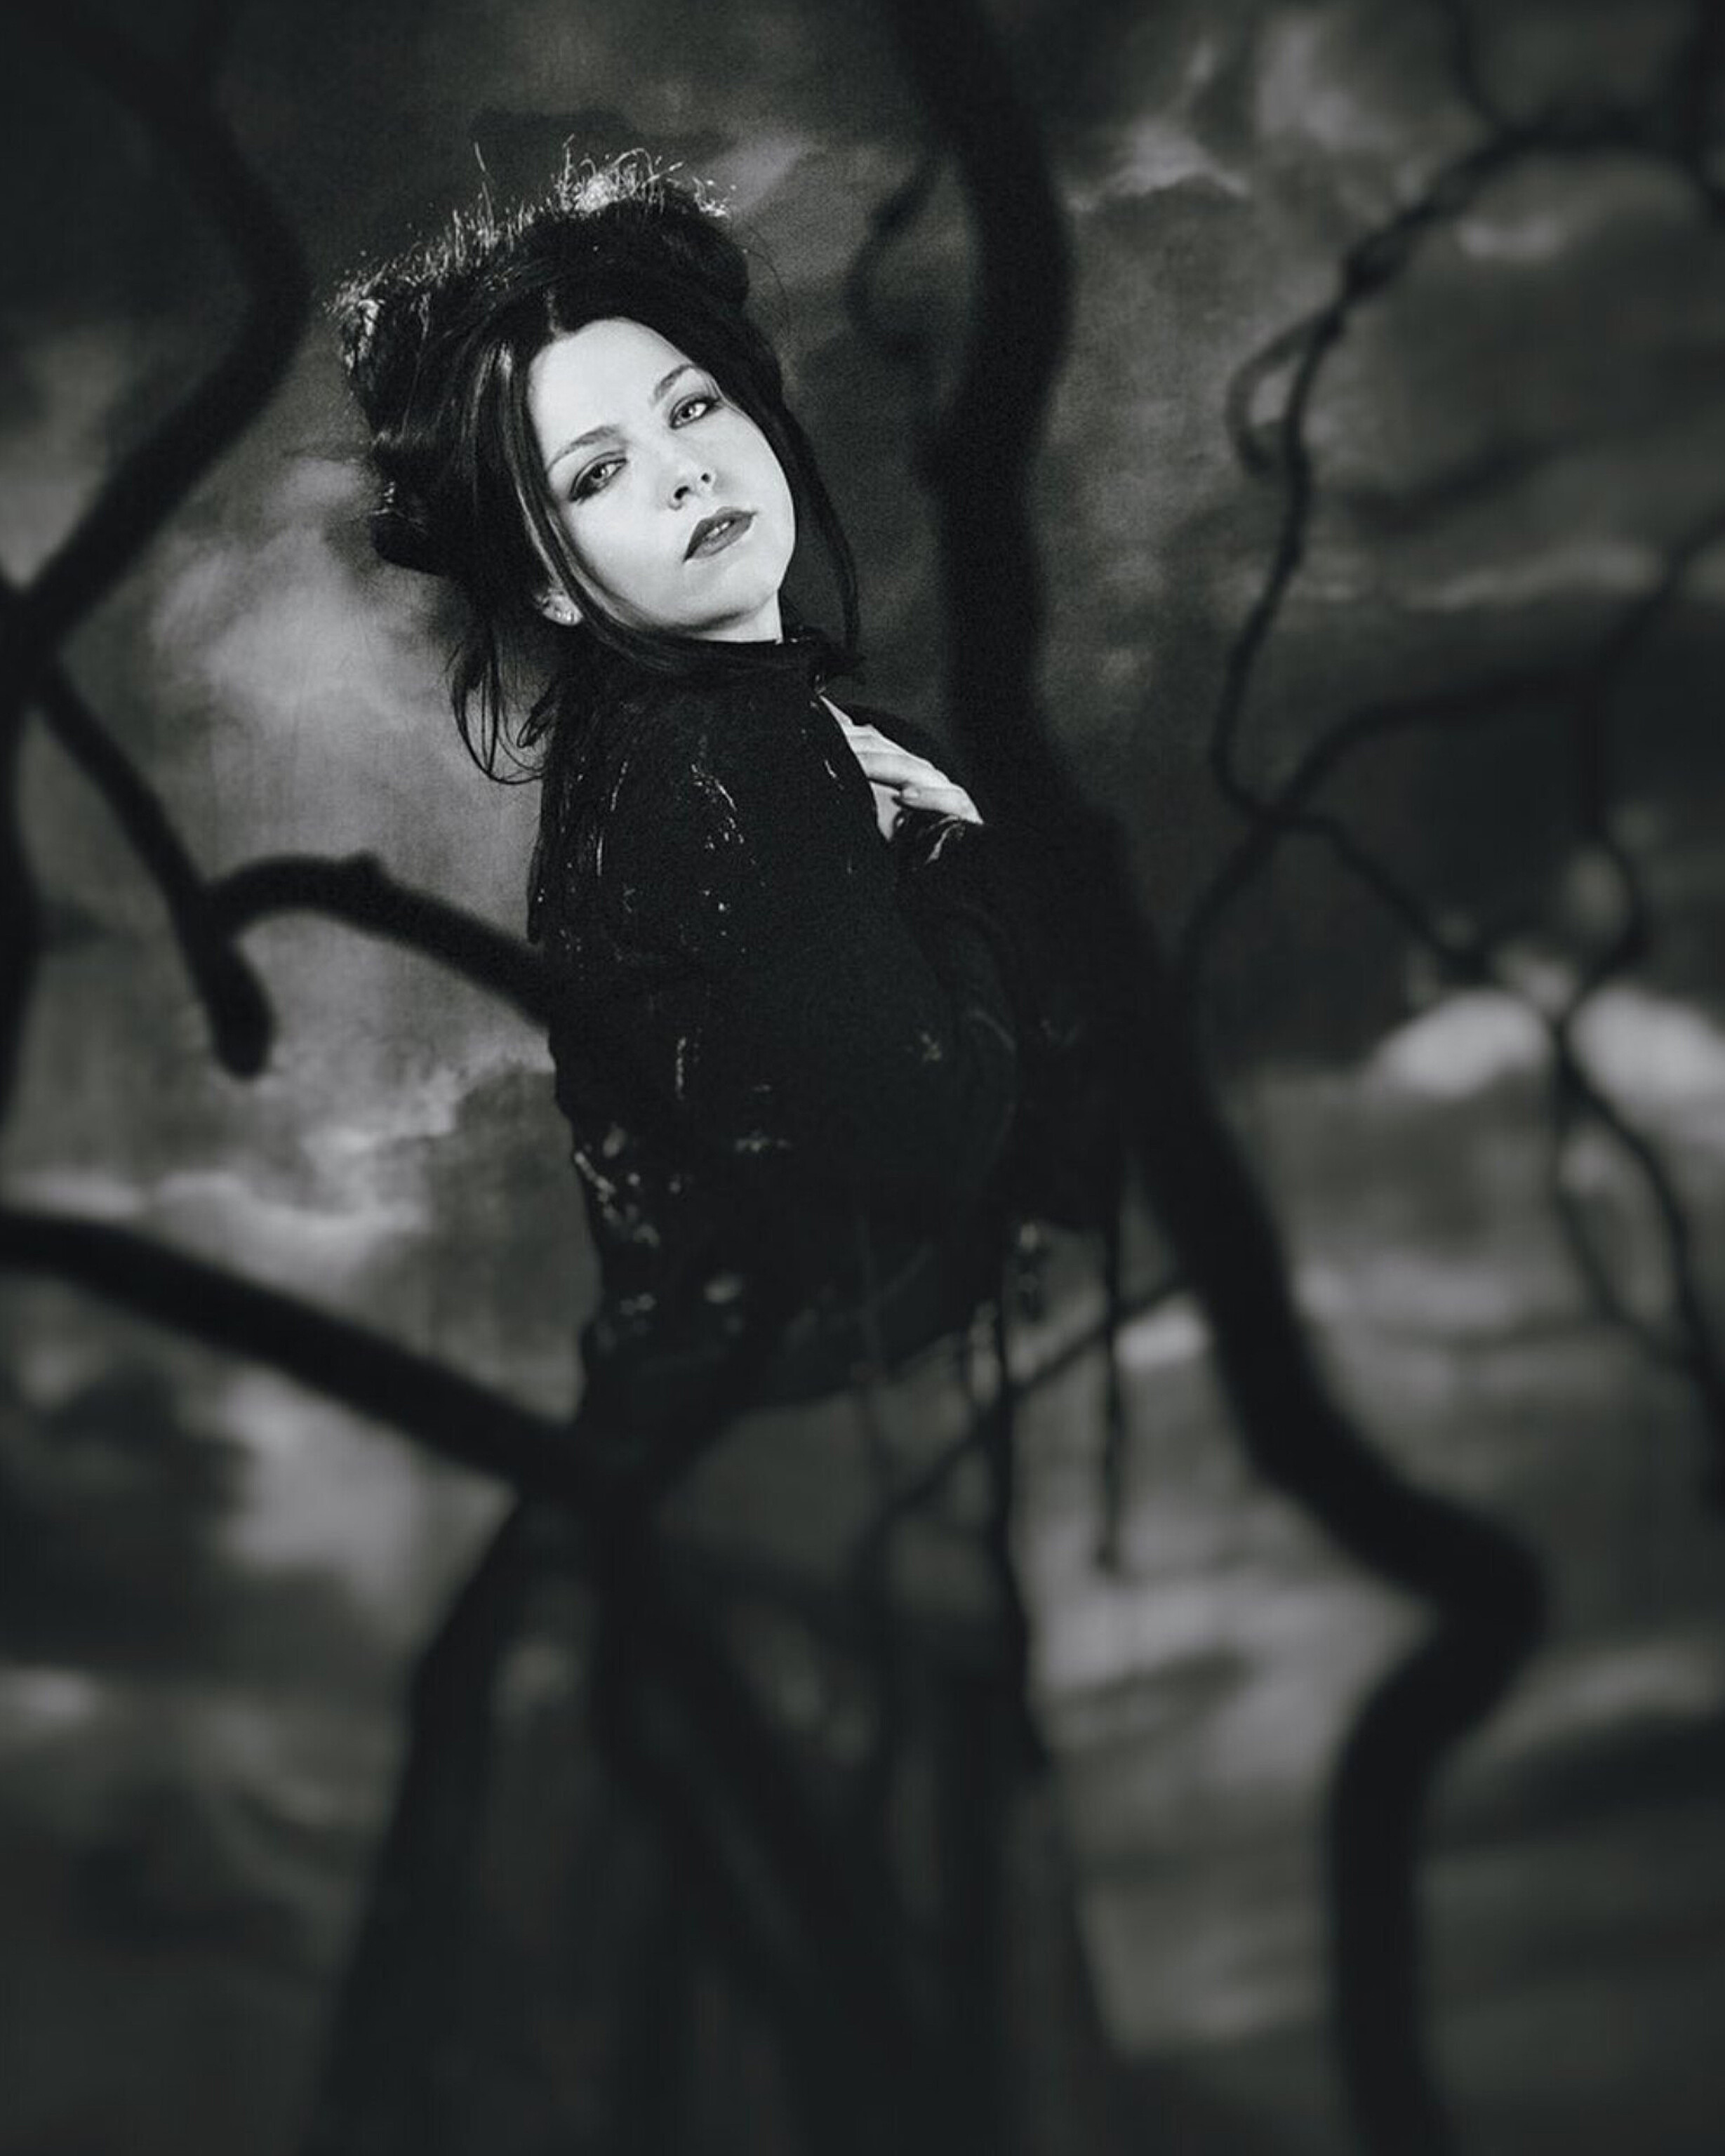 2458x3072
Keywords: amy lee;photoshoot;the open door;black and white;butterfly